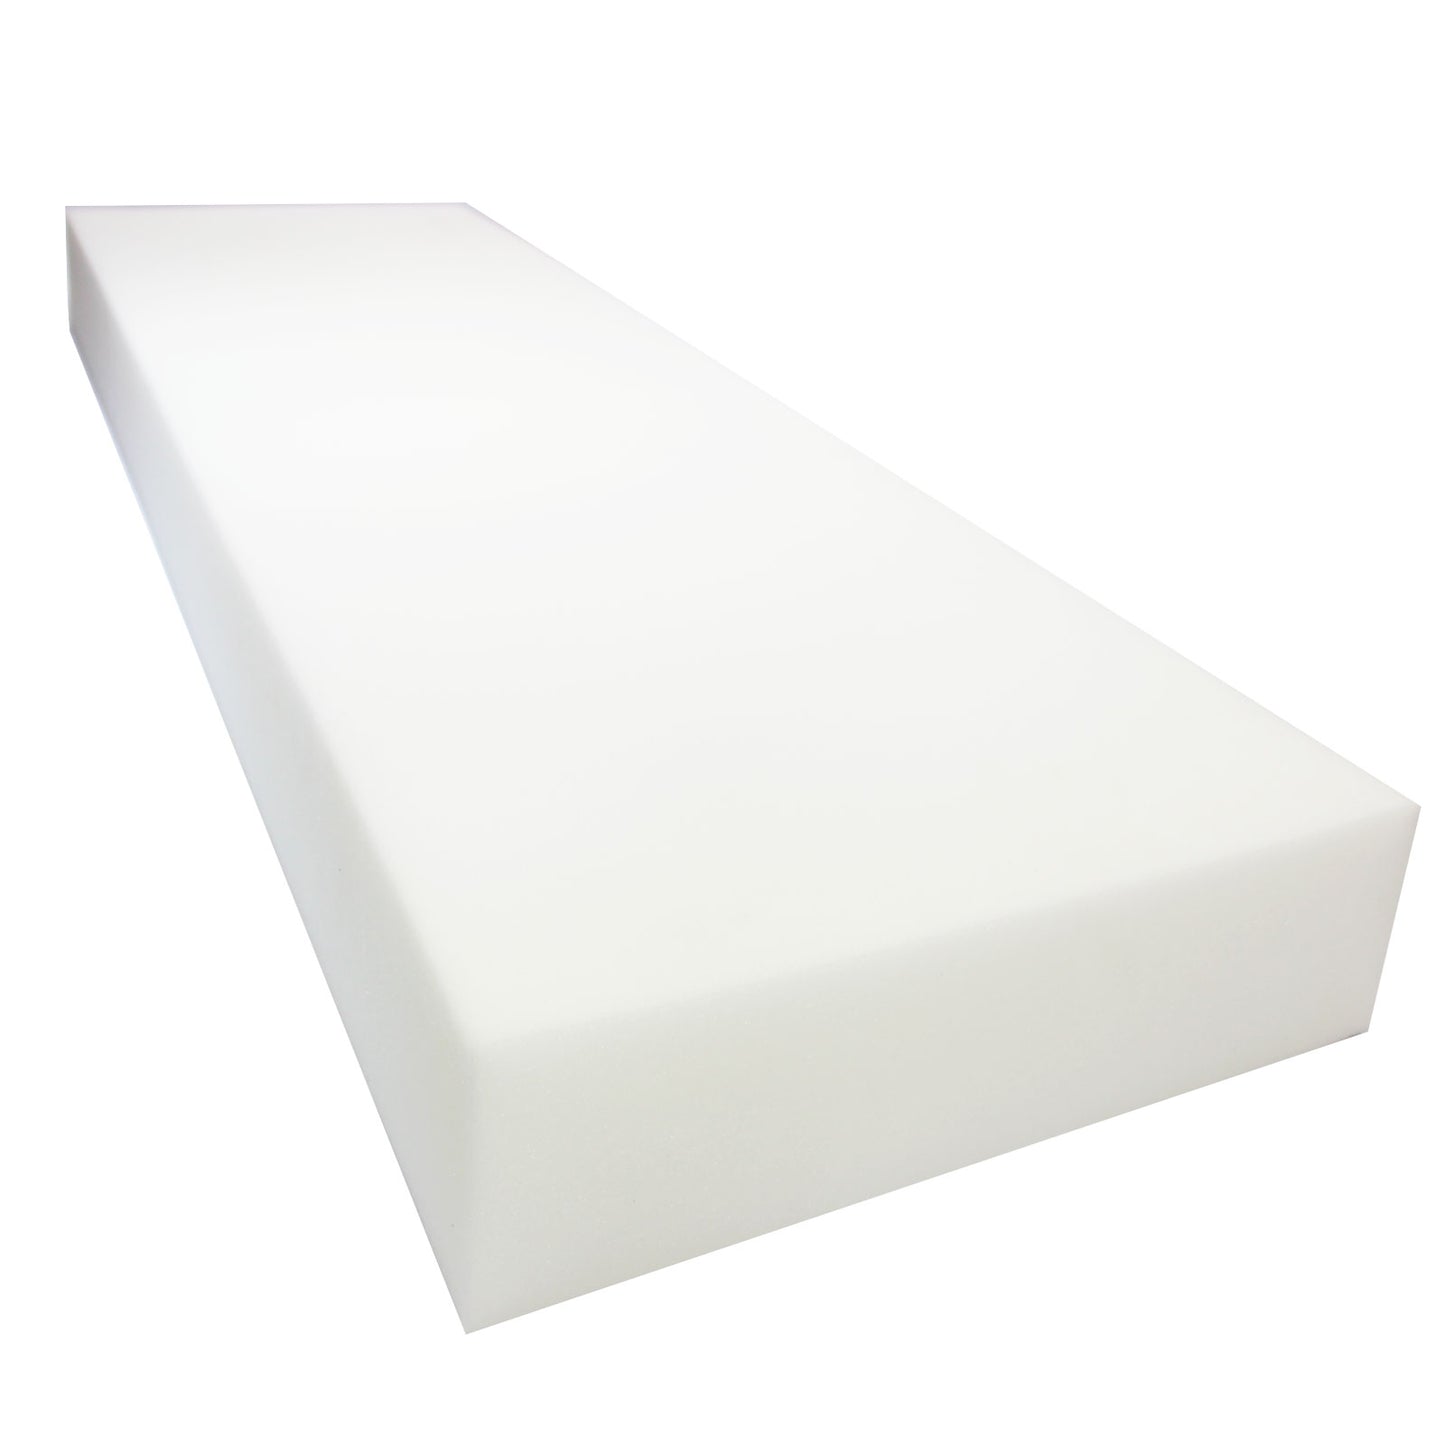 Frienda 2 Pcs Upholstery Foam 2 Inch Thick 24 Wide 72 Inches Long Density  Seat Replacement Cushion Foam Padding Upholstery Supplies Upholstery Sheet